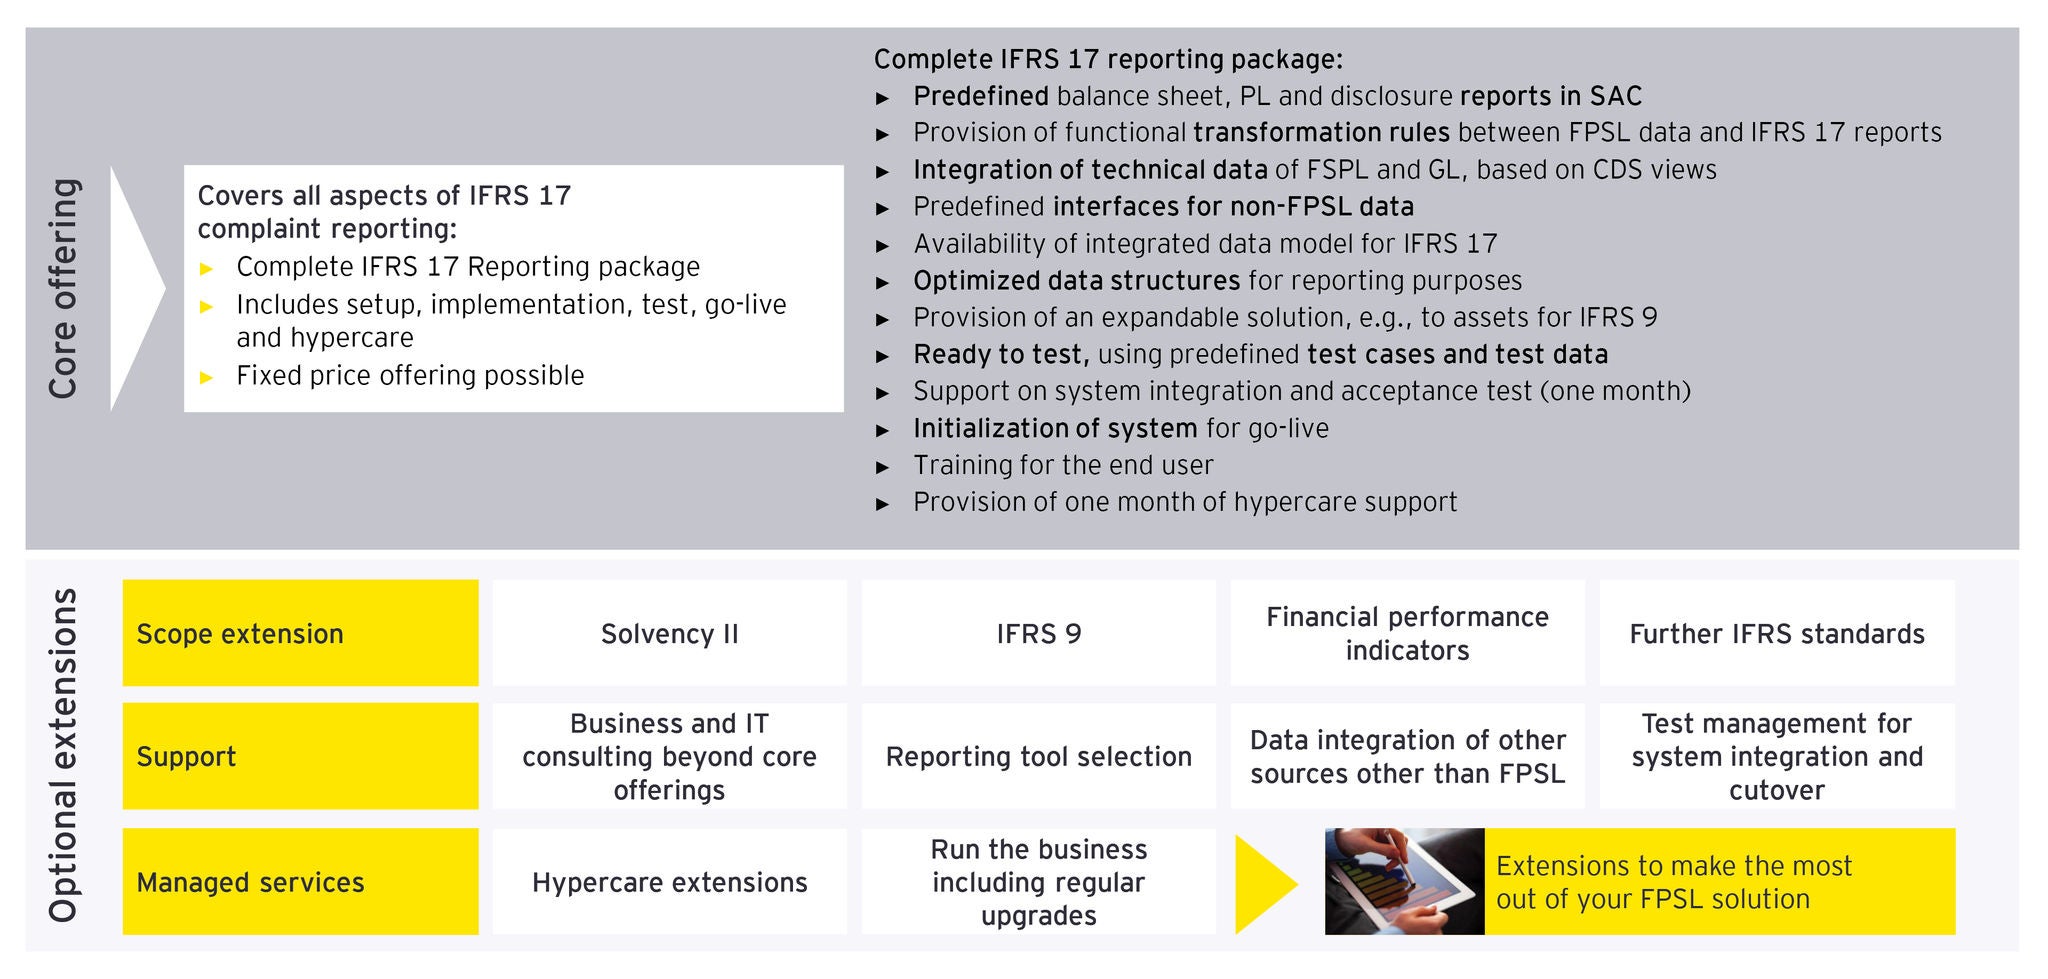 ey-ifb-packaged-solution-for-ifrs17-accounting